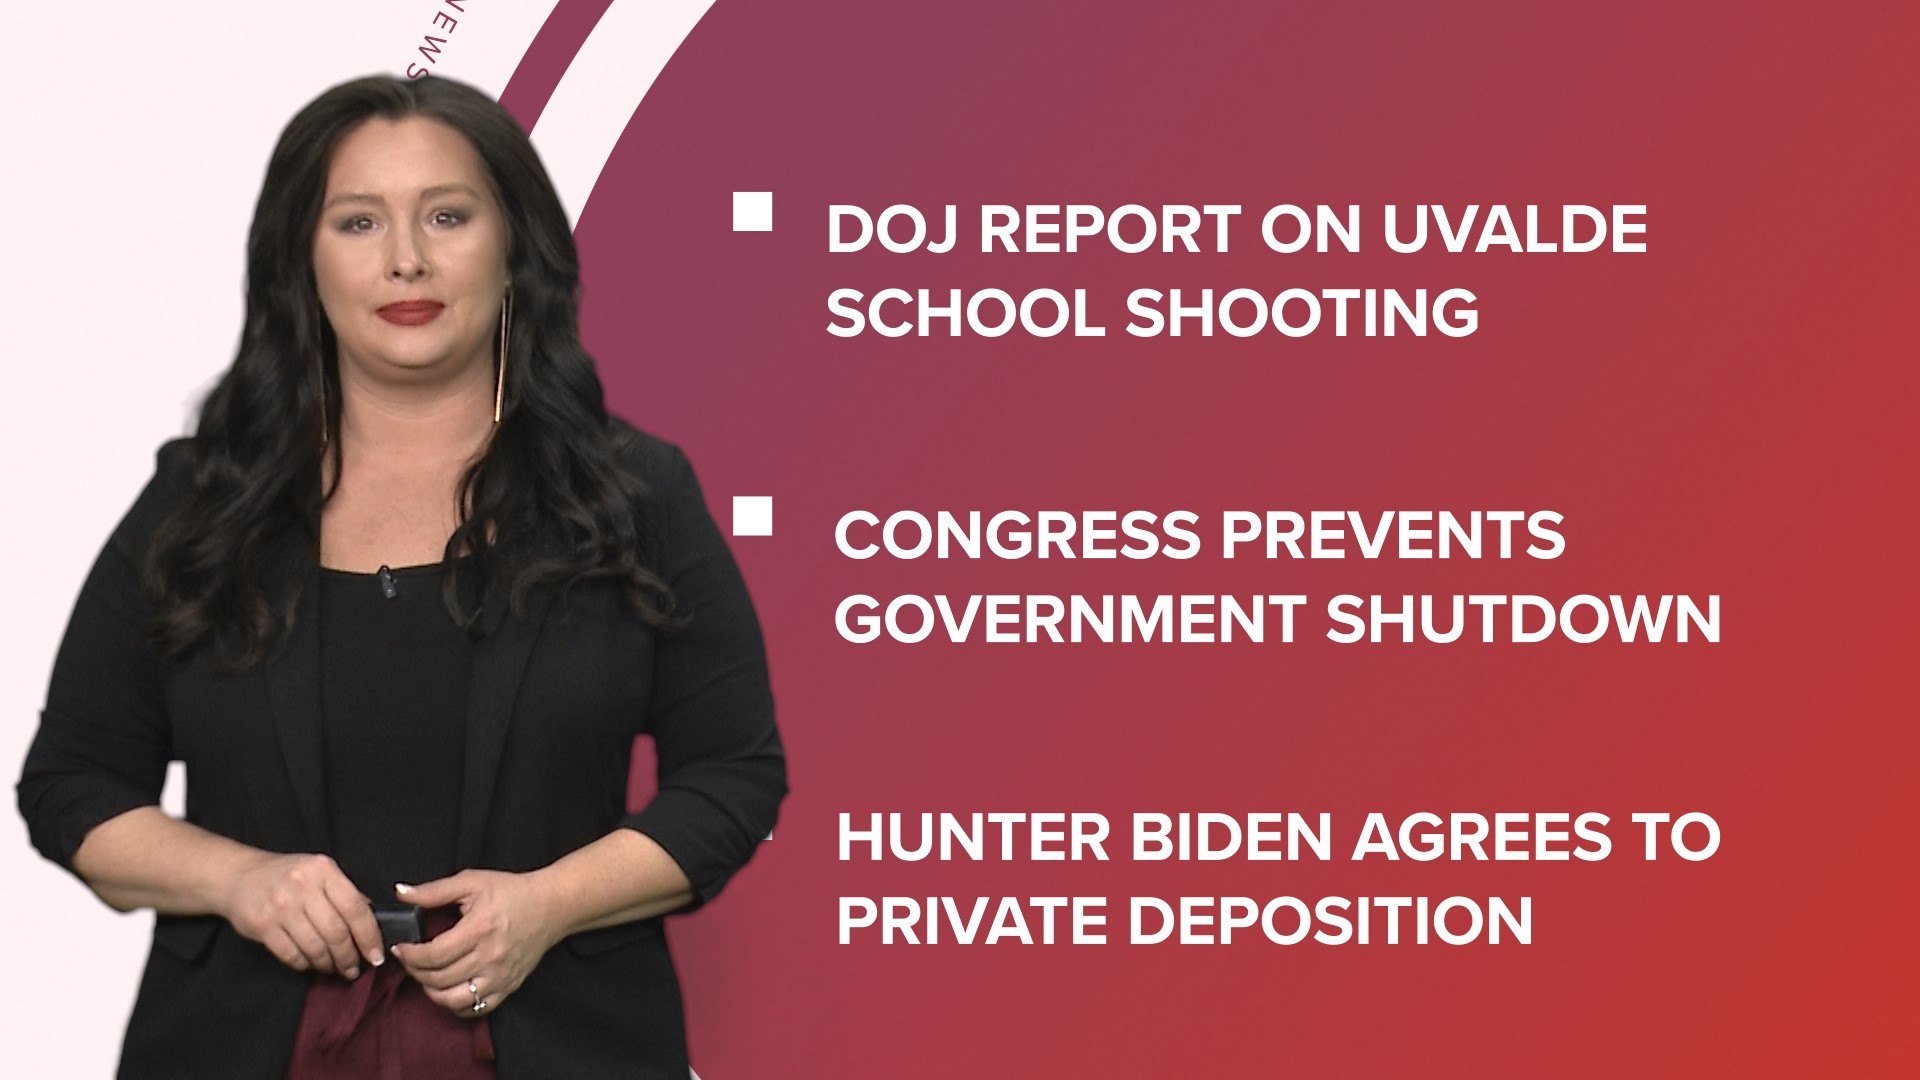 A look at what is happening in the news from the DOJ's report on the police response to the Uvalde shooting to Congress prevents a shutdown and more.